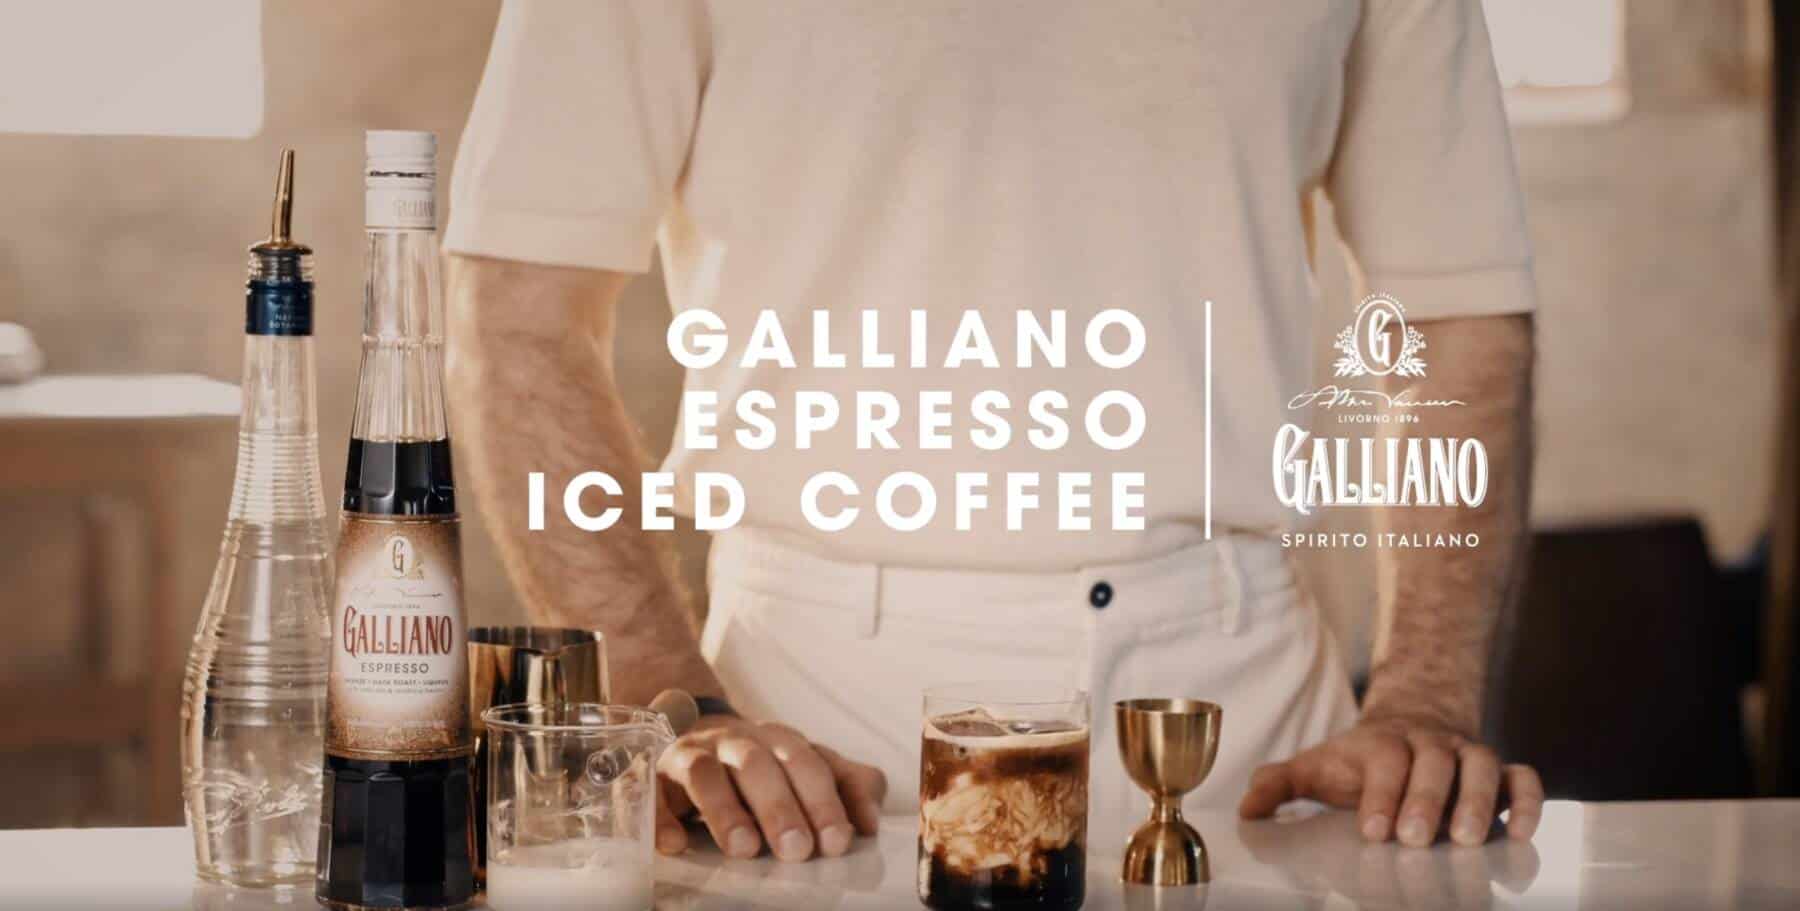 Espresso Iced Coffee cocktail by Galliano